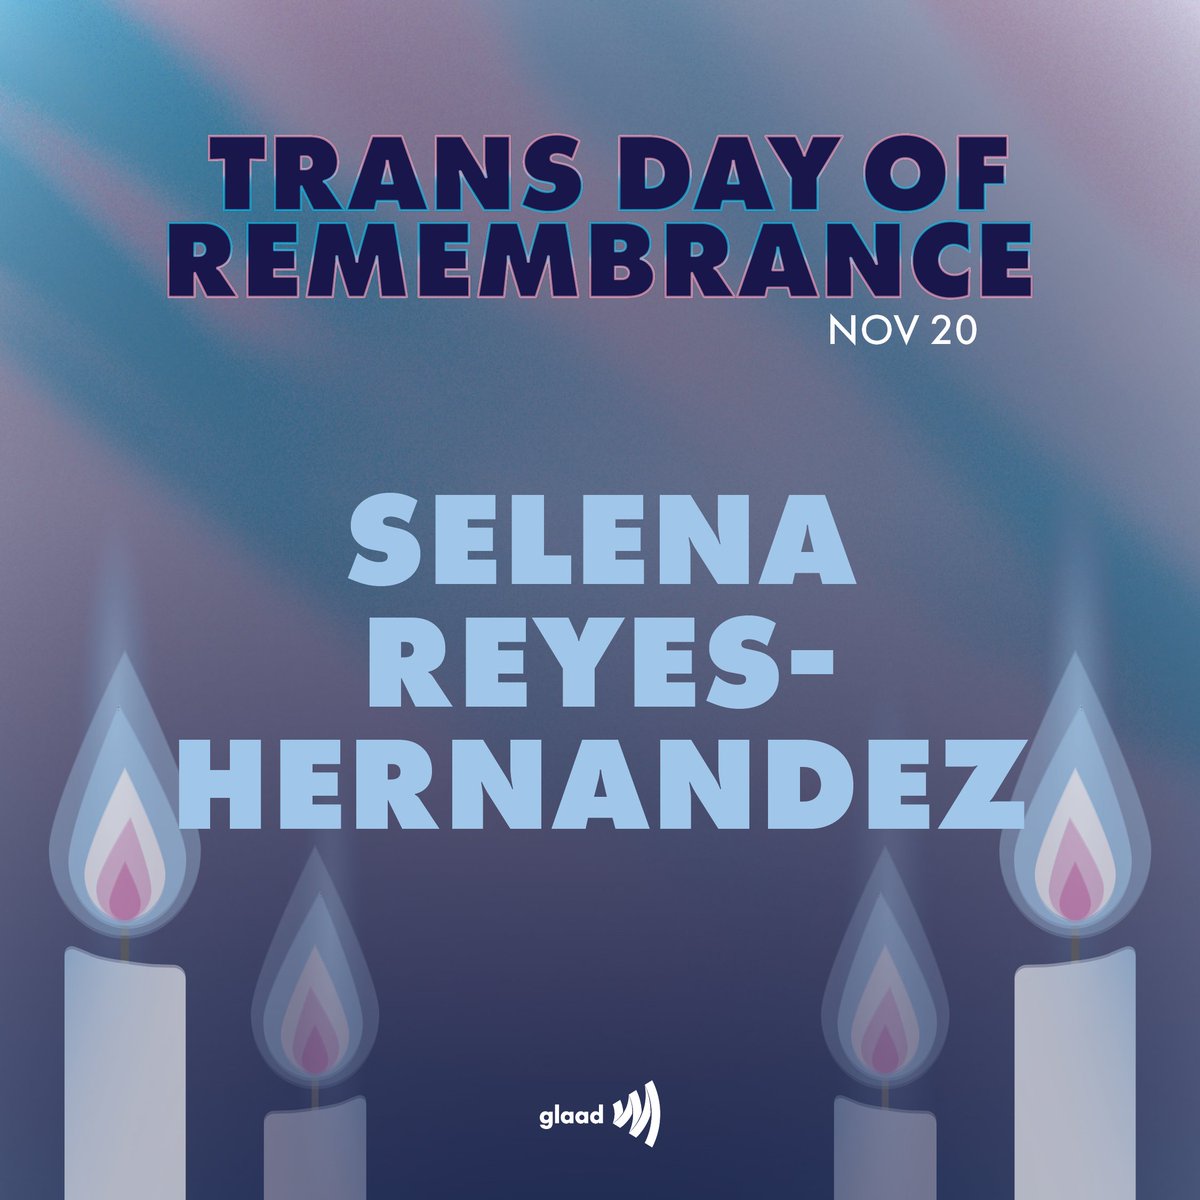 Selena Reyes-Hernandez, a transgender woman, was killed in Chicago, Illinois on May 31, 2020. She was 37 years old.